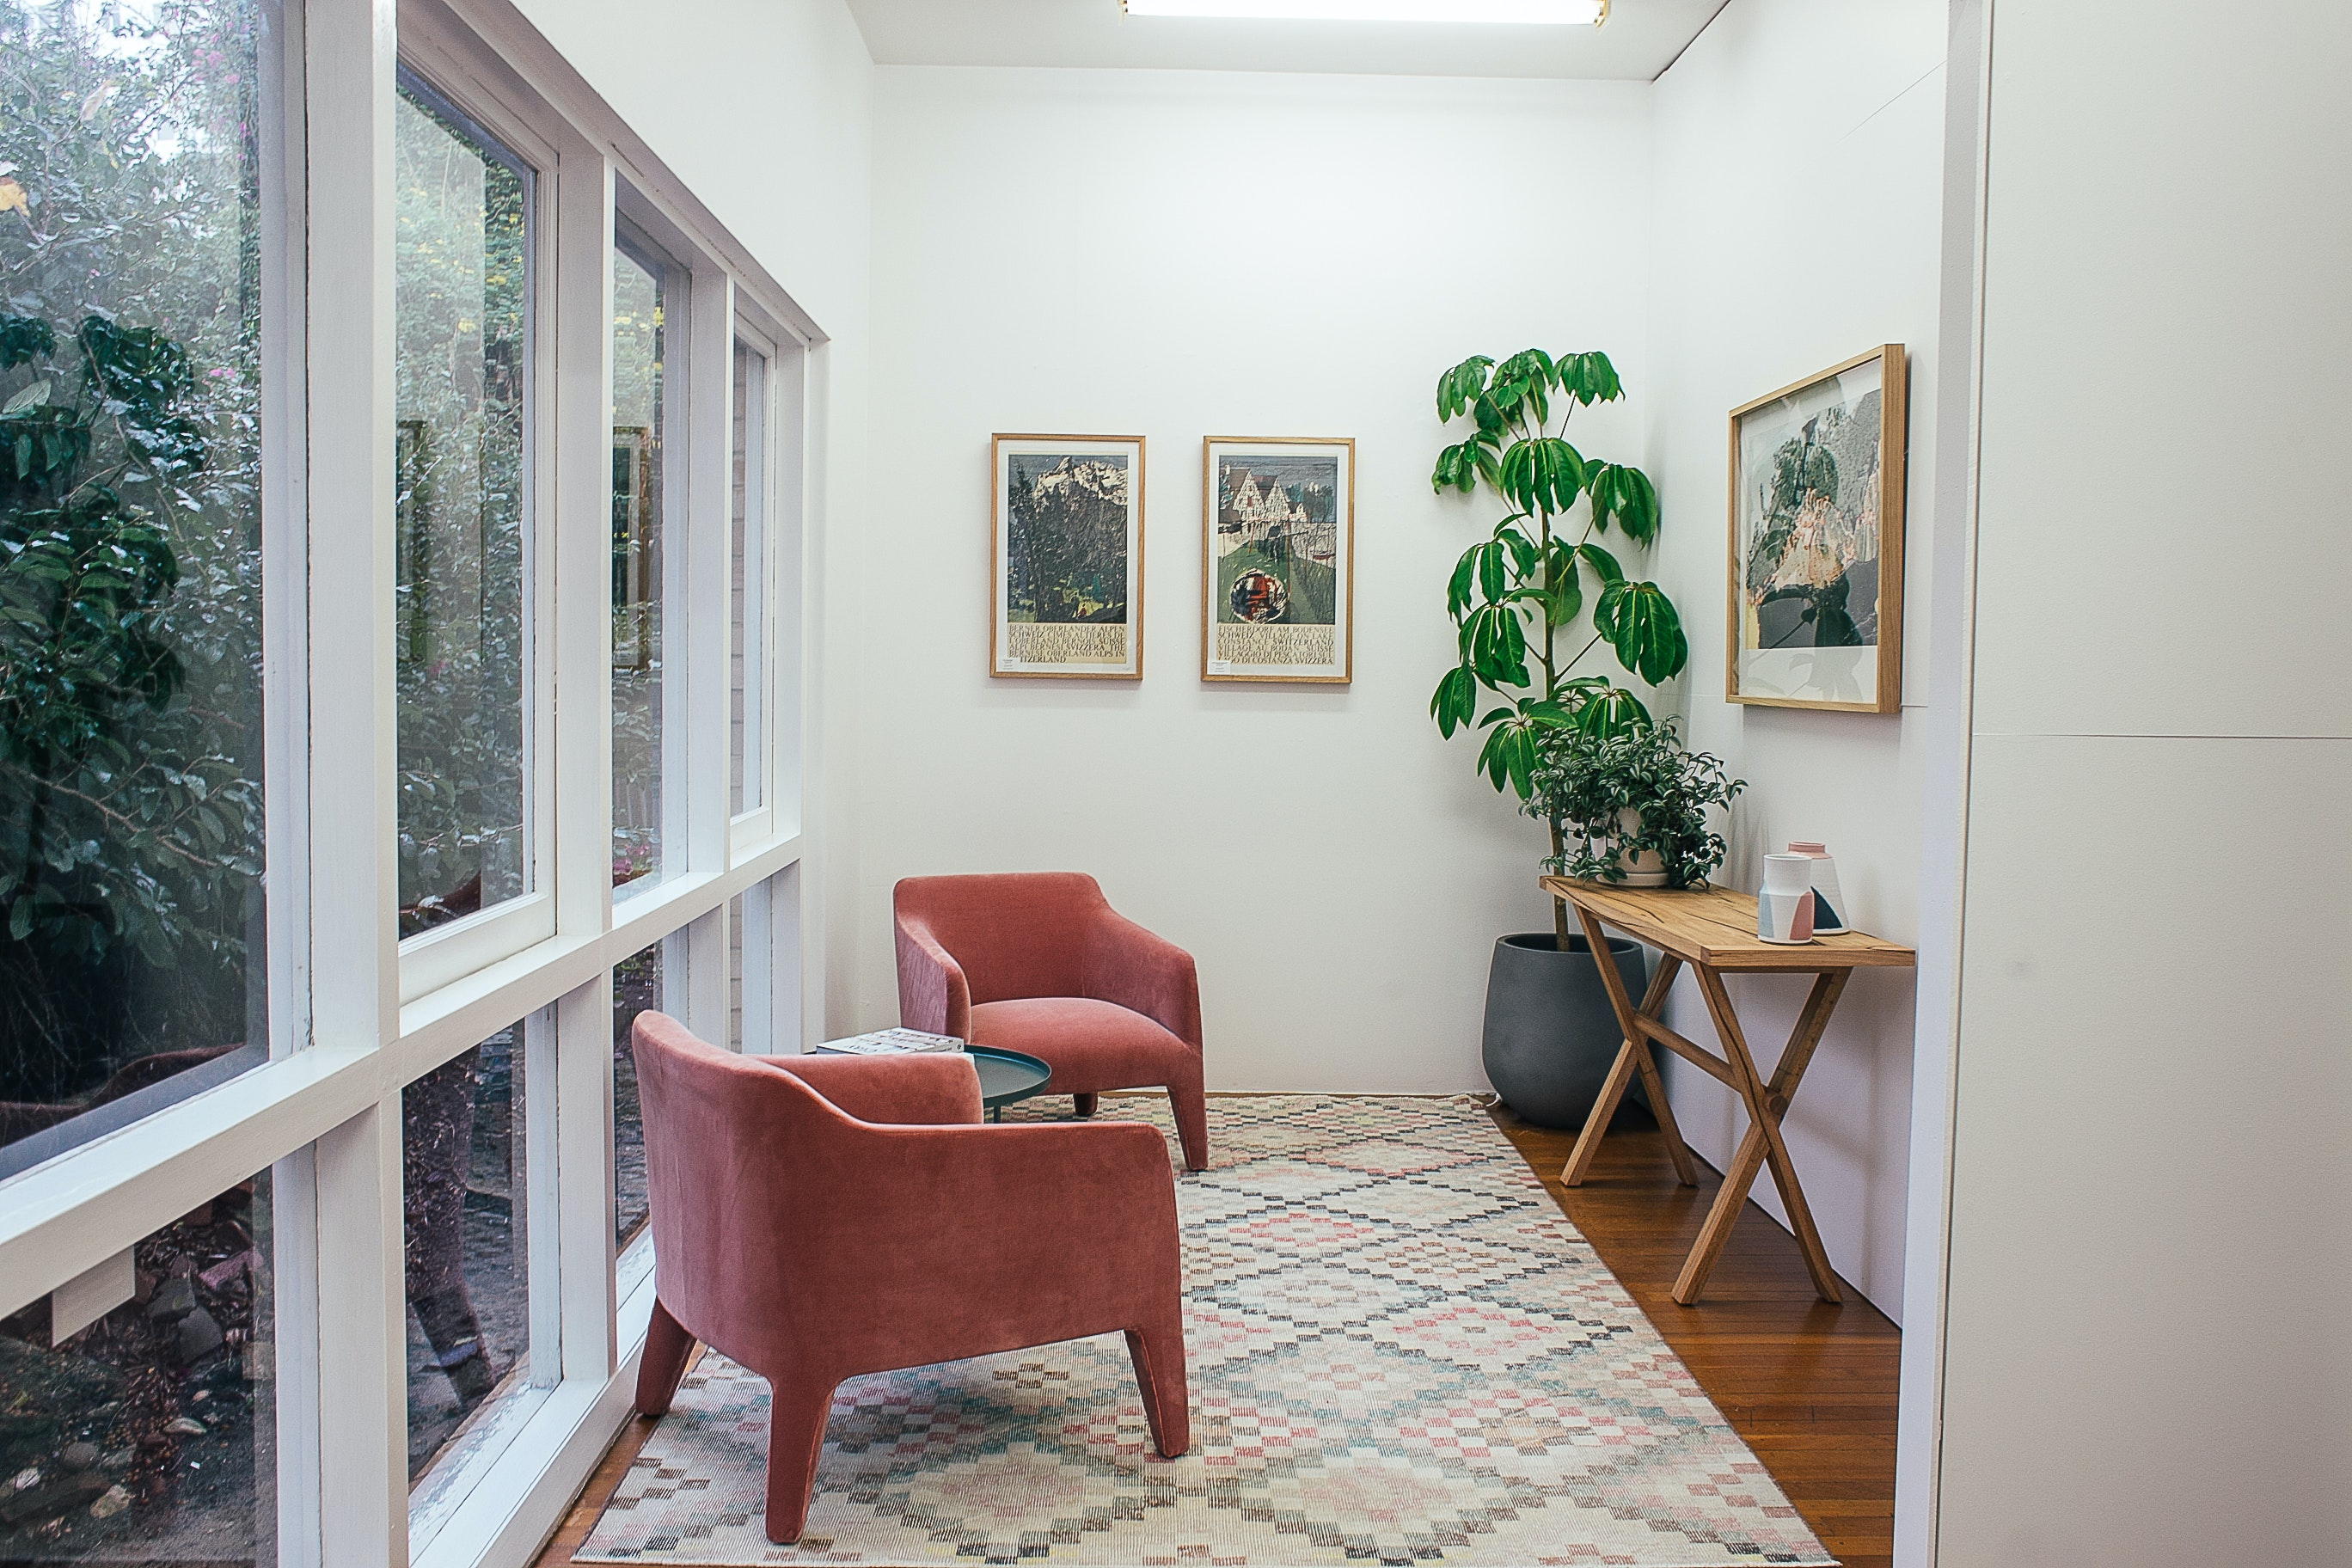 Photo by Rachel Claire: https://www.pexels.com/photo/armchairs-placed-near-window-in-house-4846436/